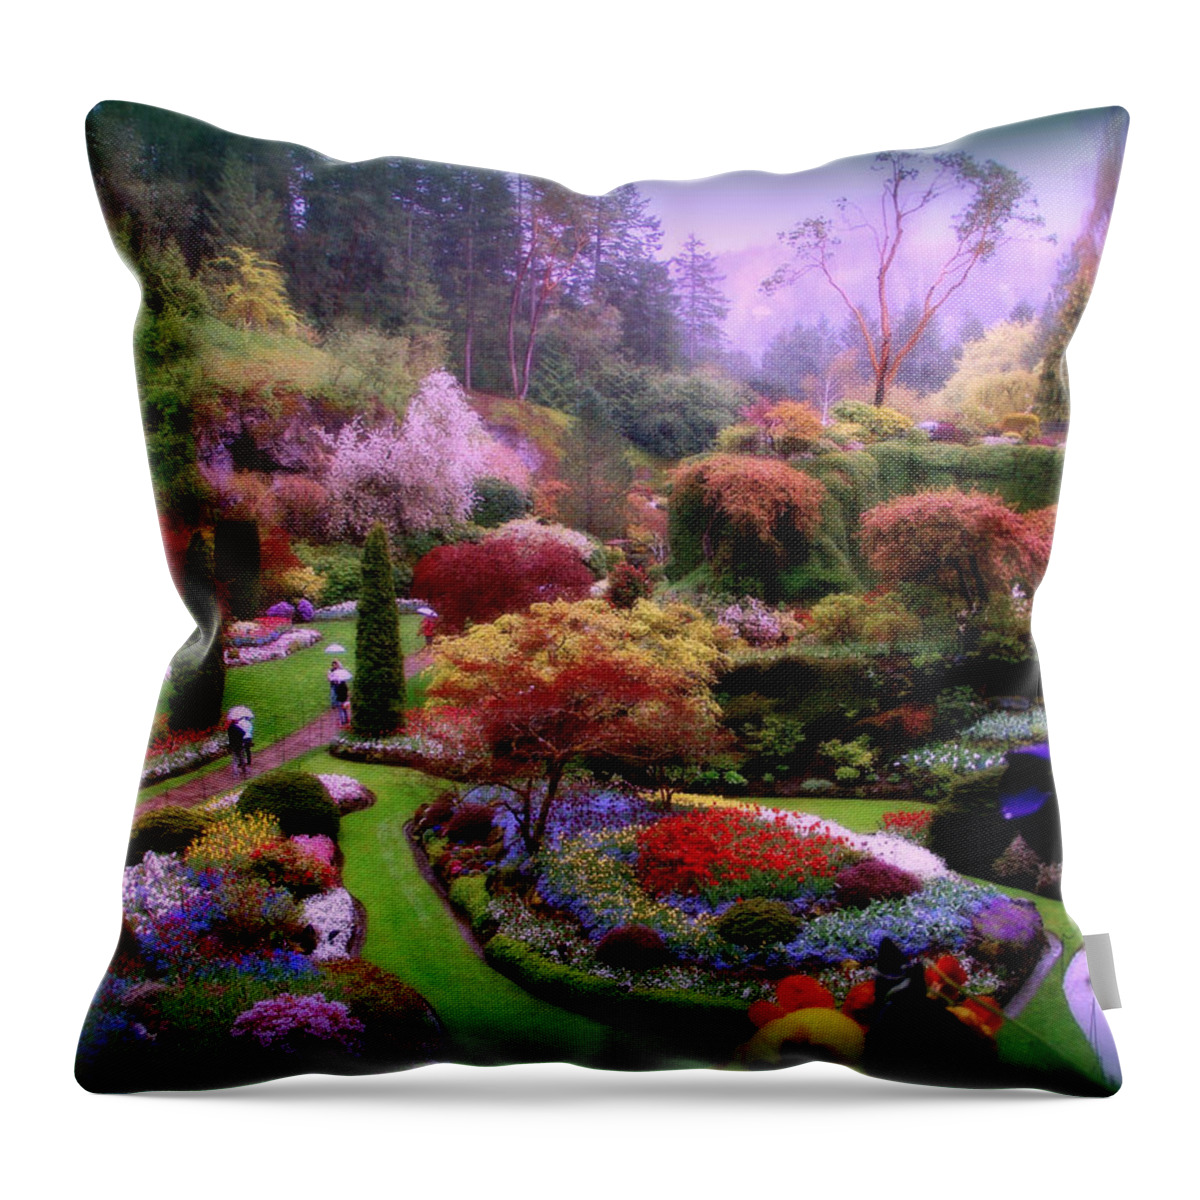 Must Be Heaven Throw Pillow featuring the photograph Must Be Heaven by Micki Findlay